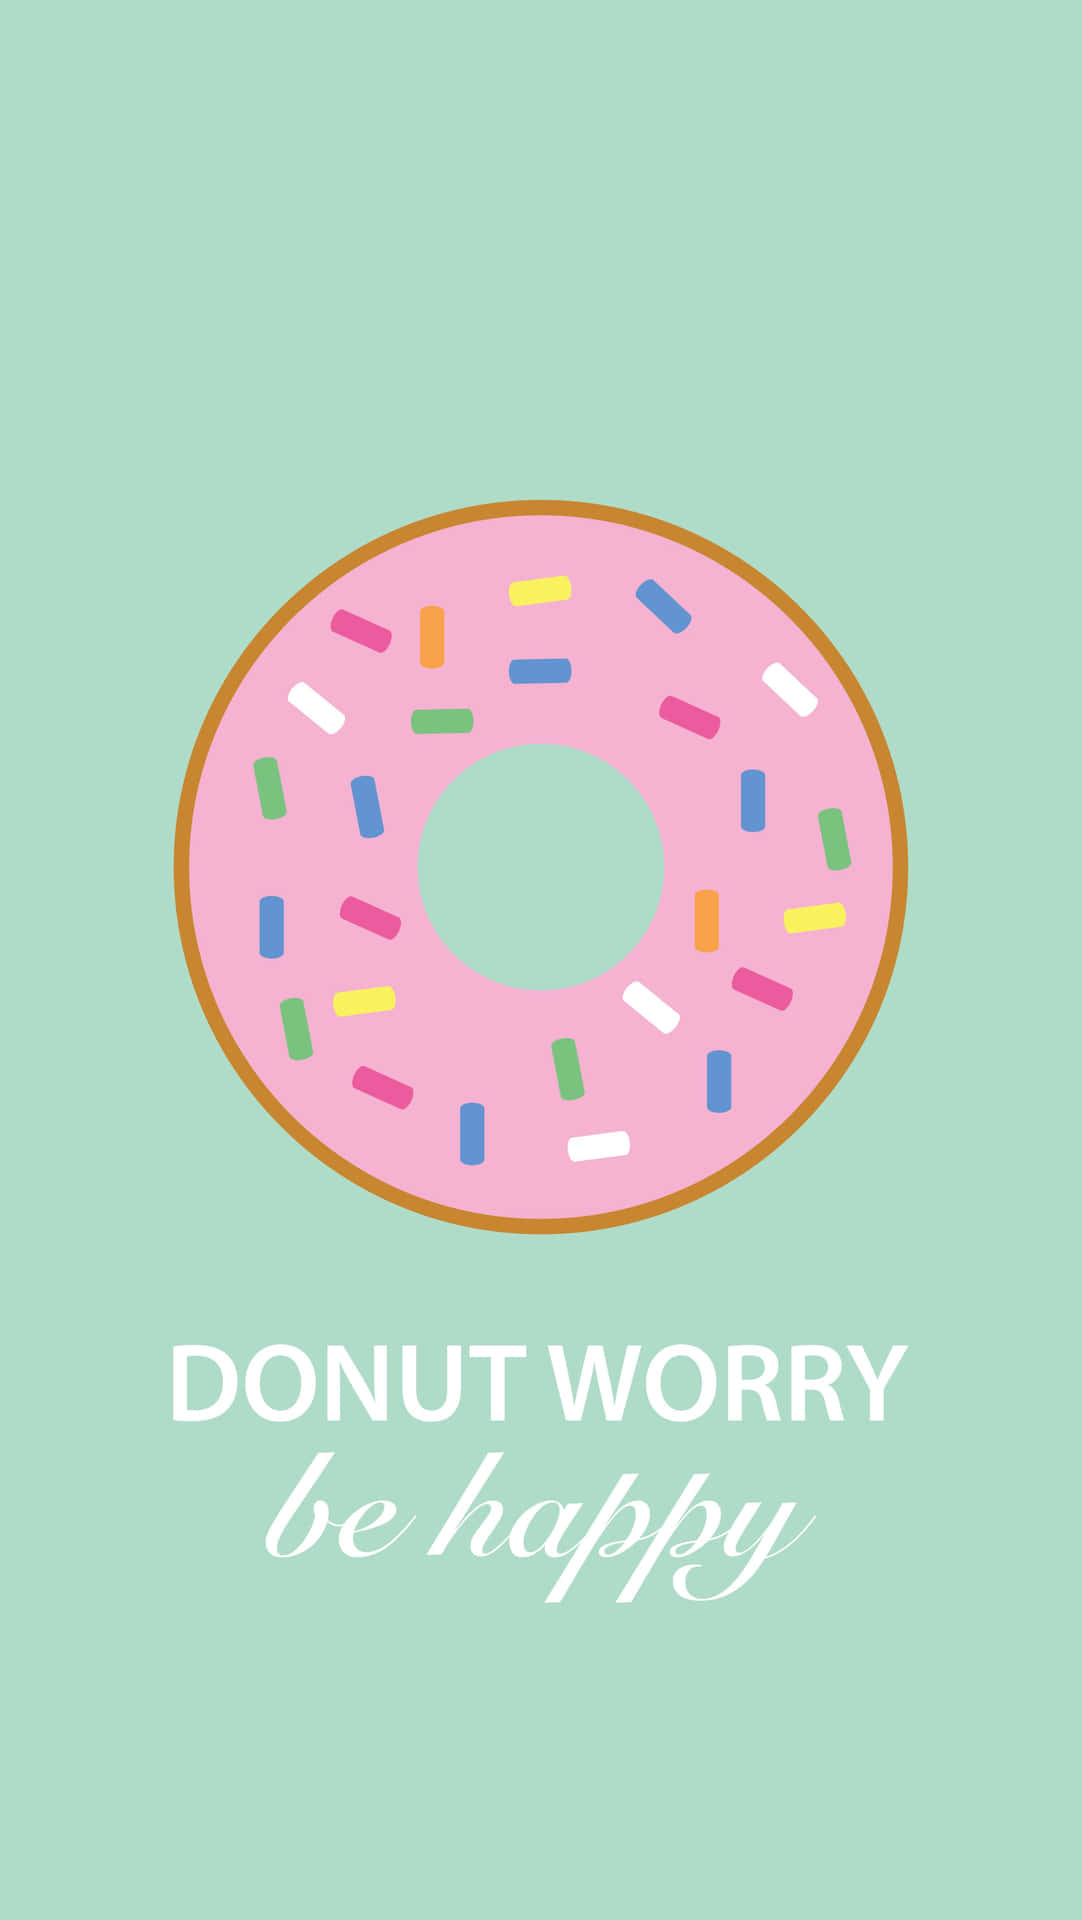 Adorable Smiling Donut with Colorful Sprinkles Wallpaper